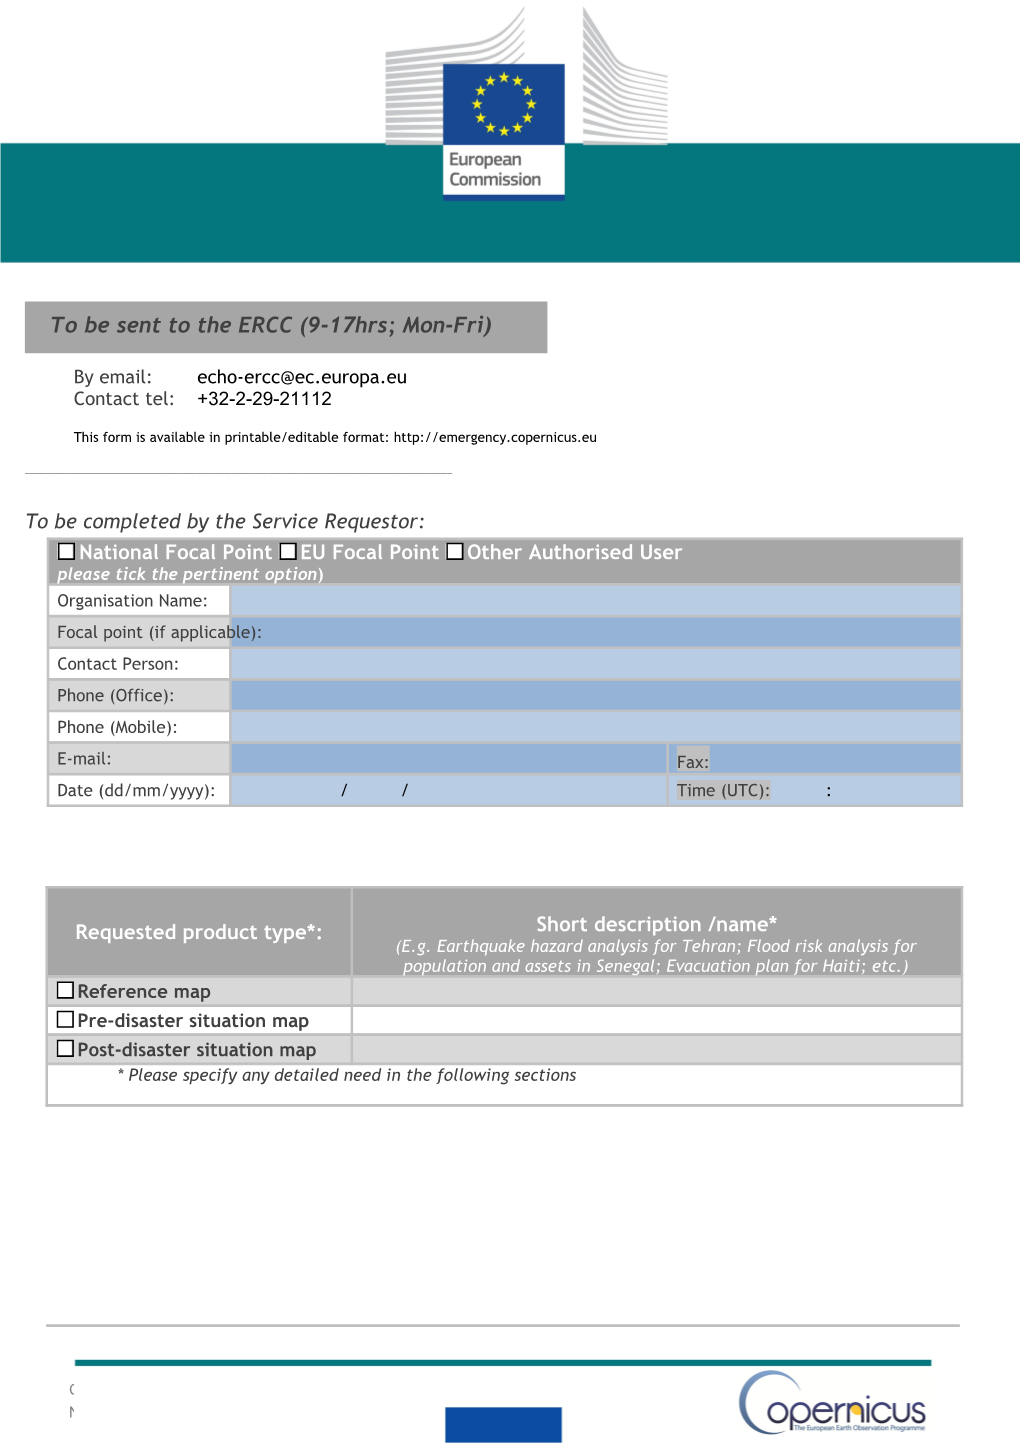 This Form Is Available in Printable/Editable Format